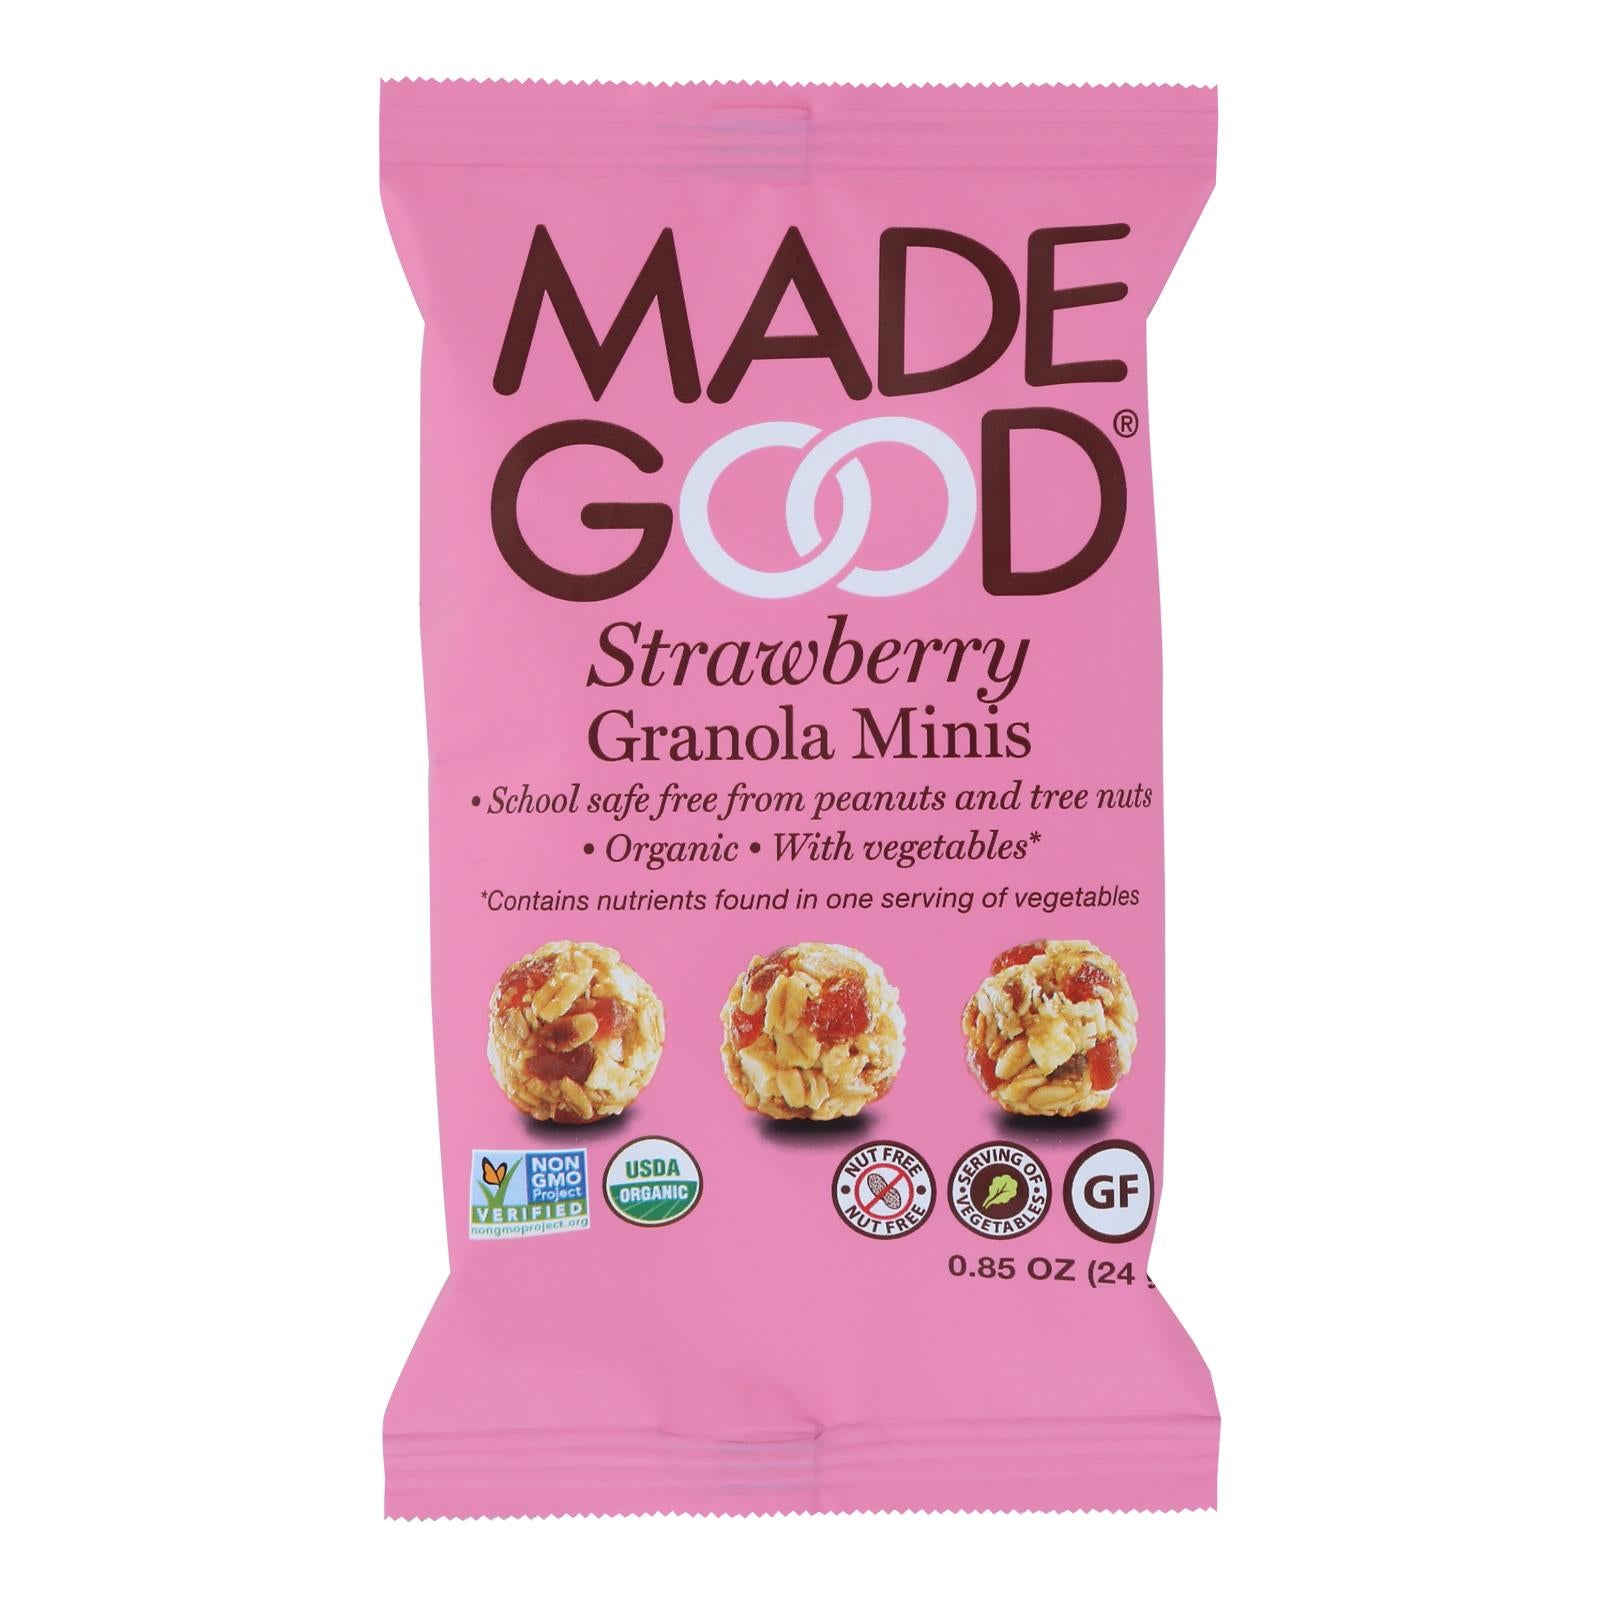 Made Good - Granola Minis - Strawberry - Case Of 12 - 0.85 Oz. - Whole Green Foods